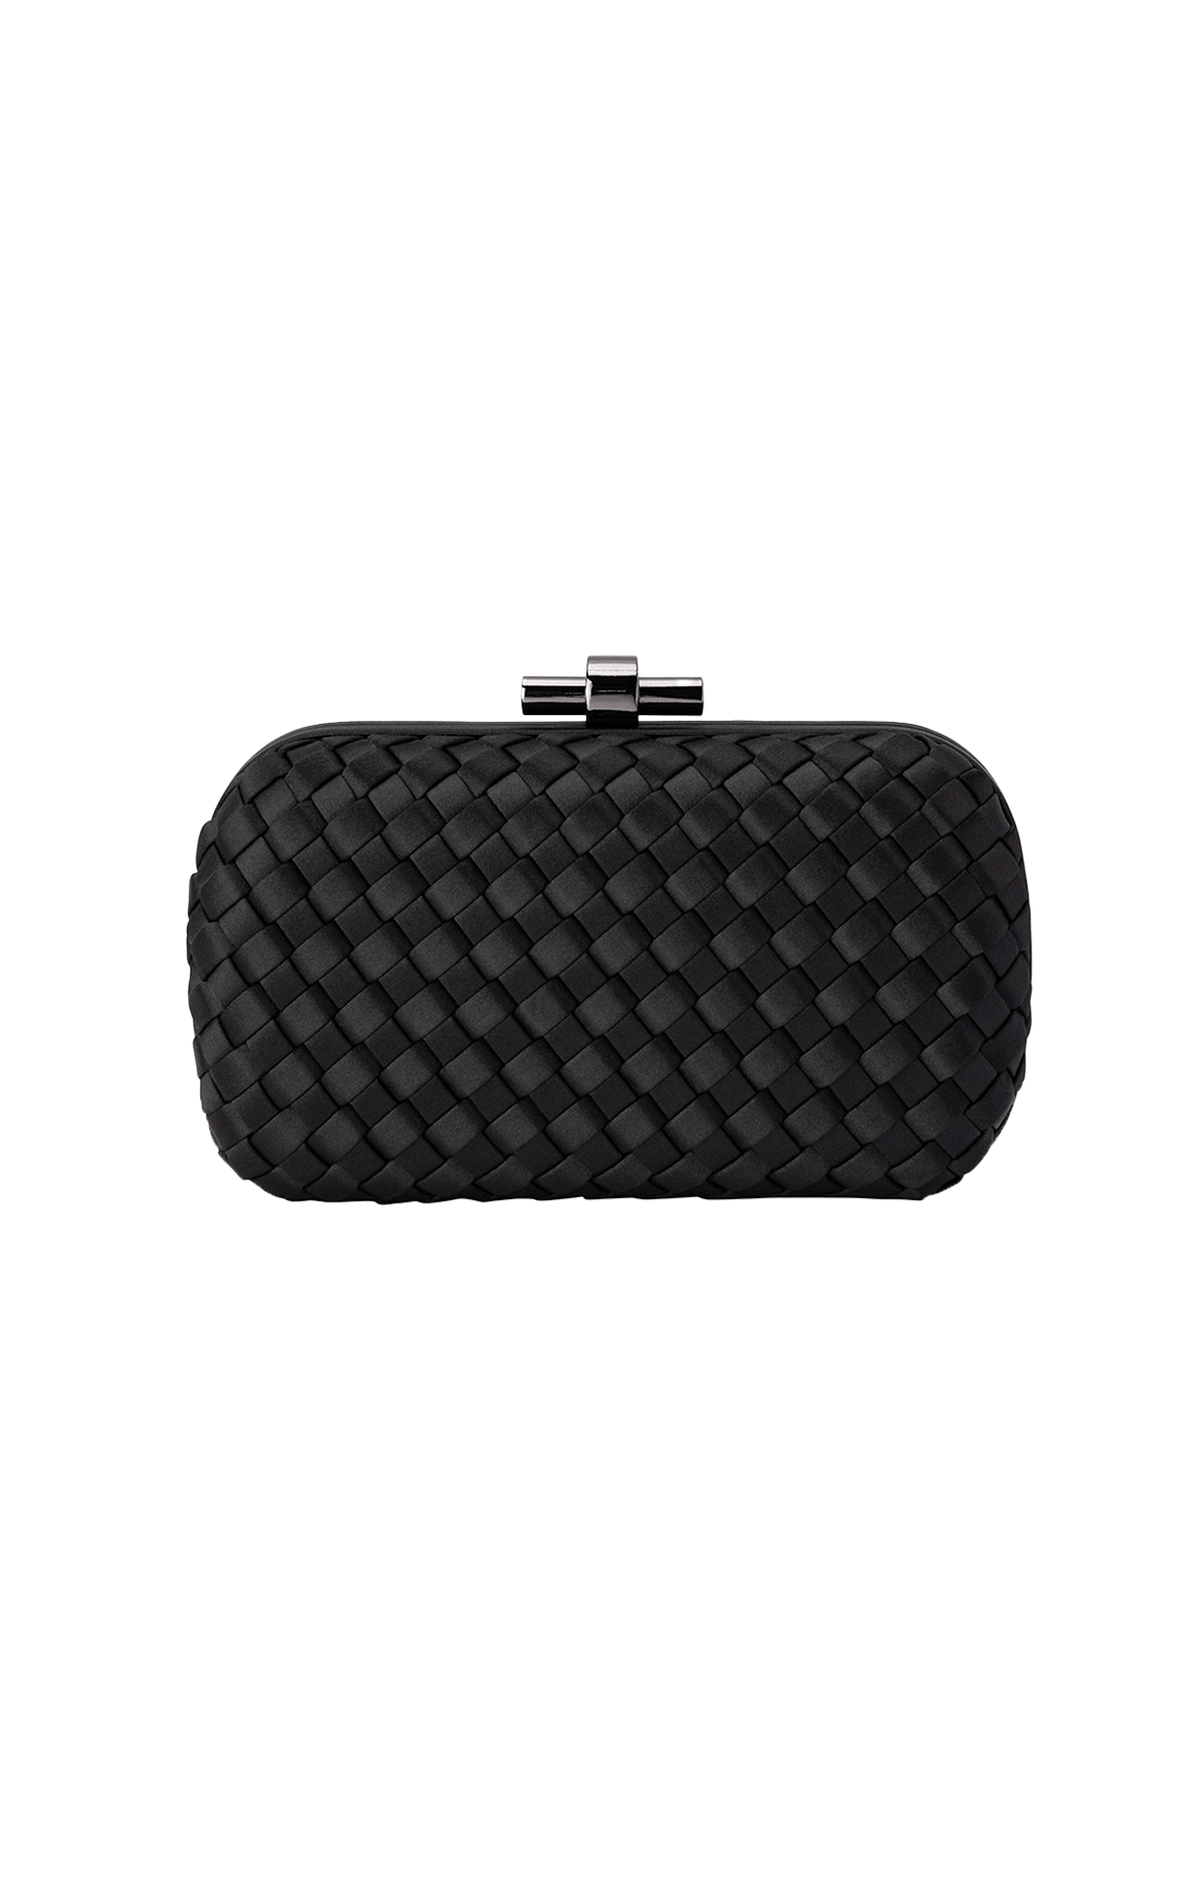 Bags OS / BLACK EVELYN WOVEN CLUTCH IN BLACK